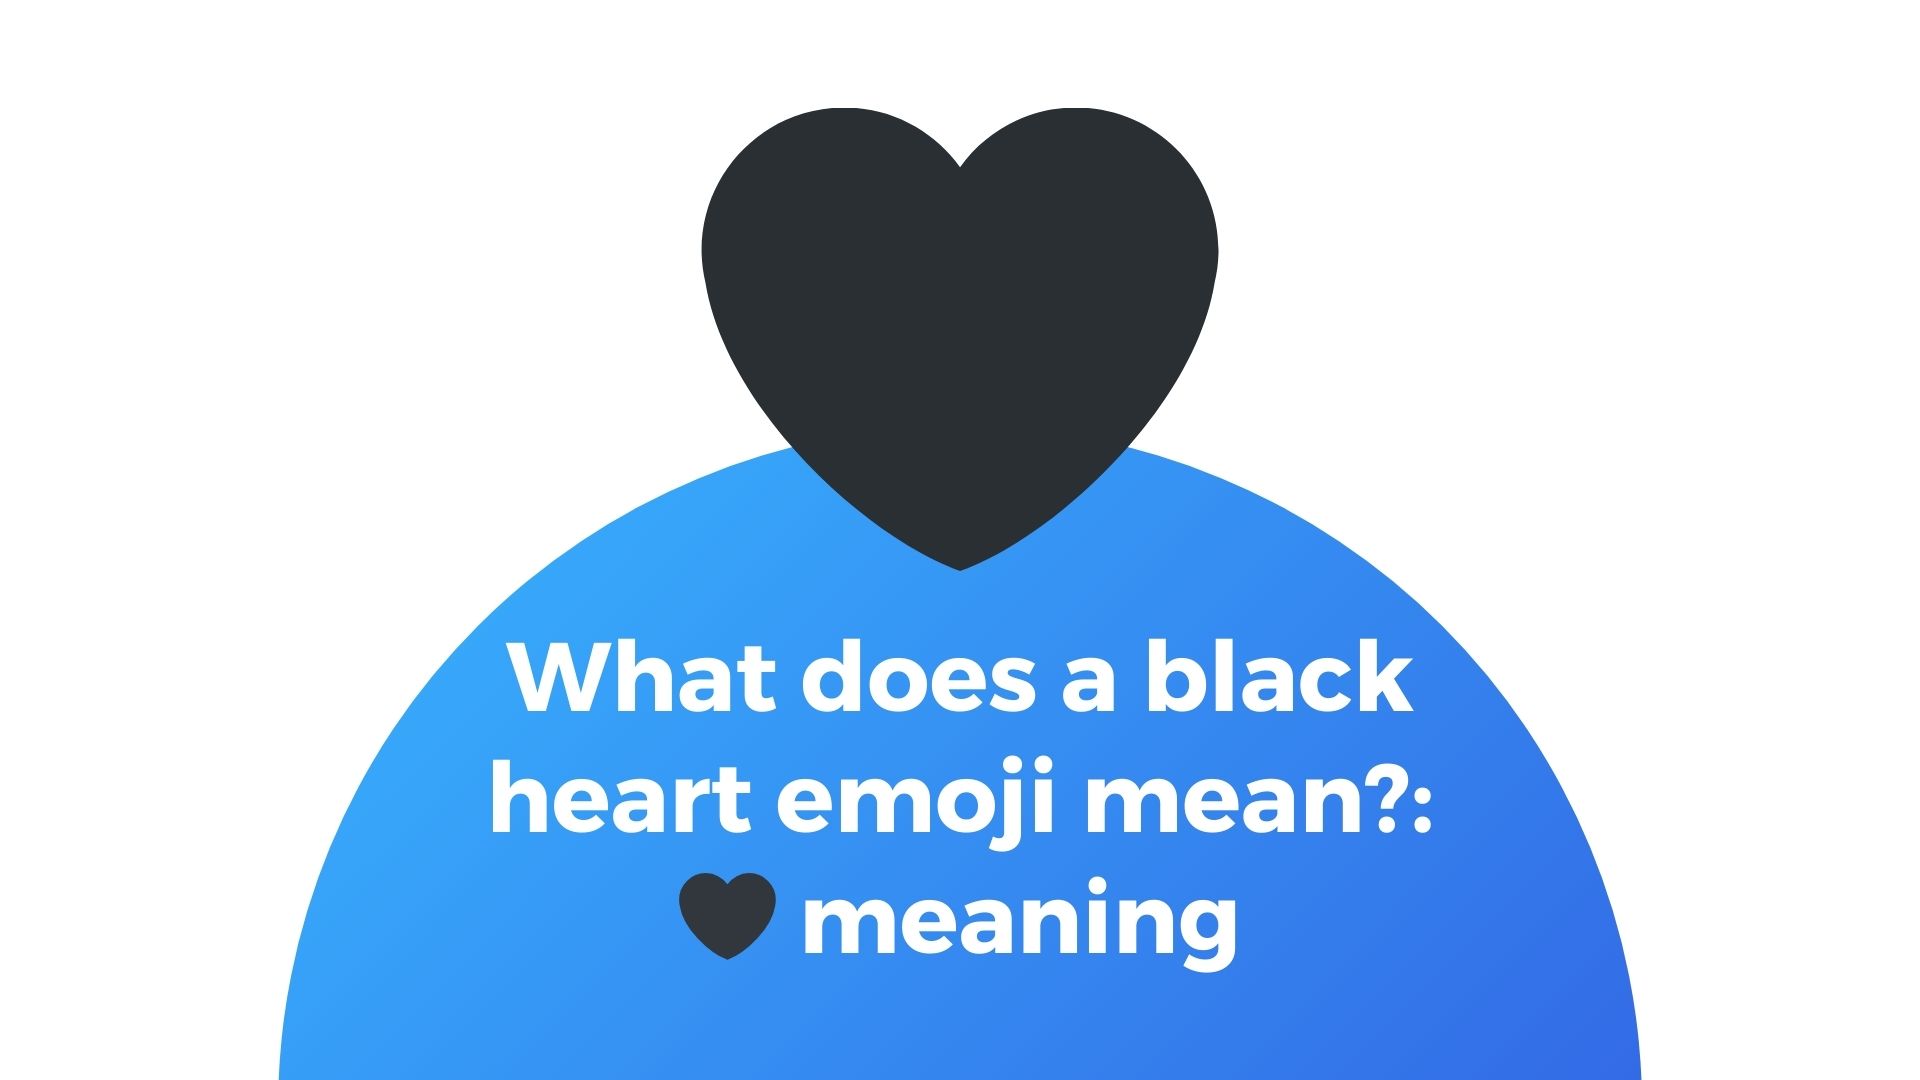 What does a black heart mean?